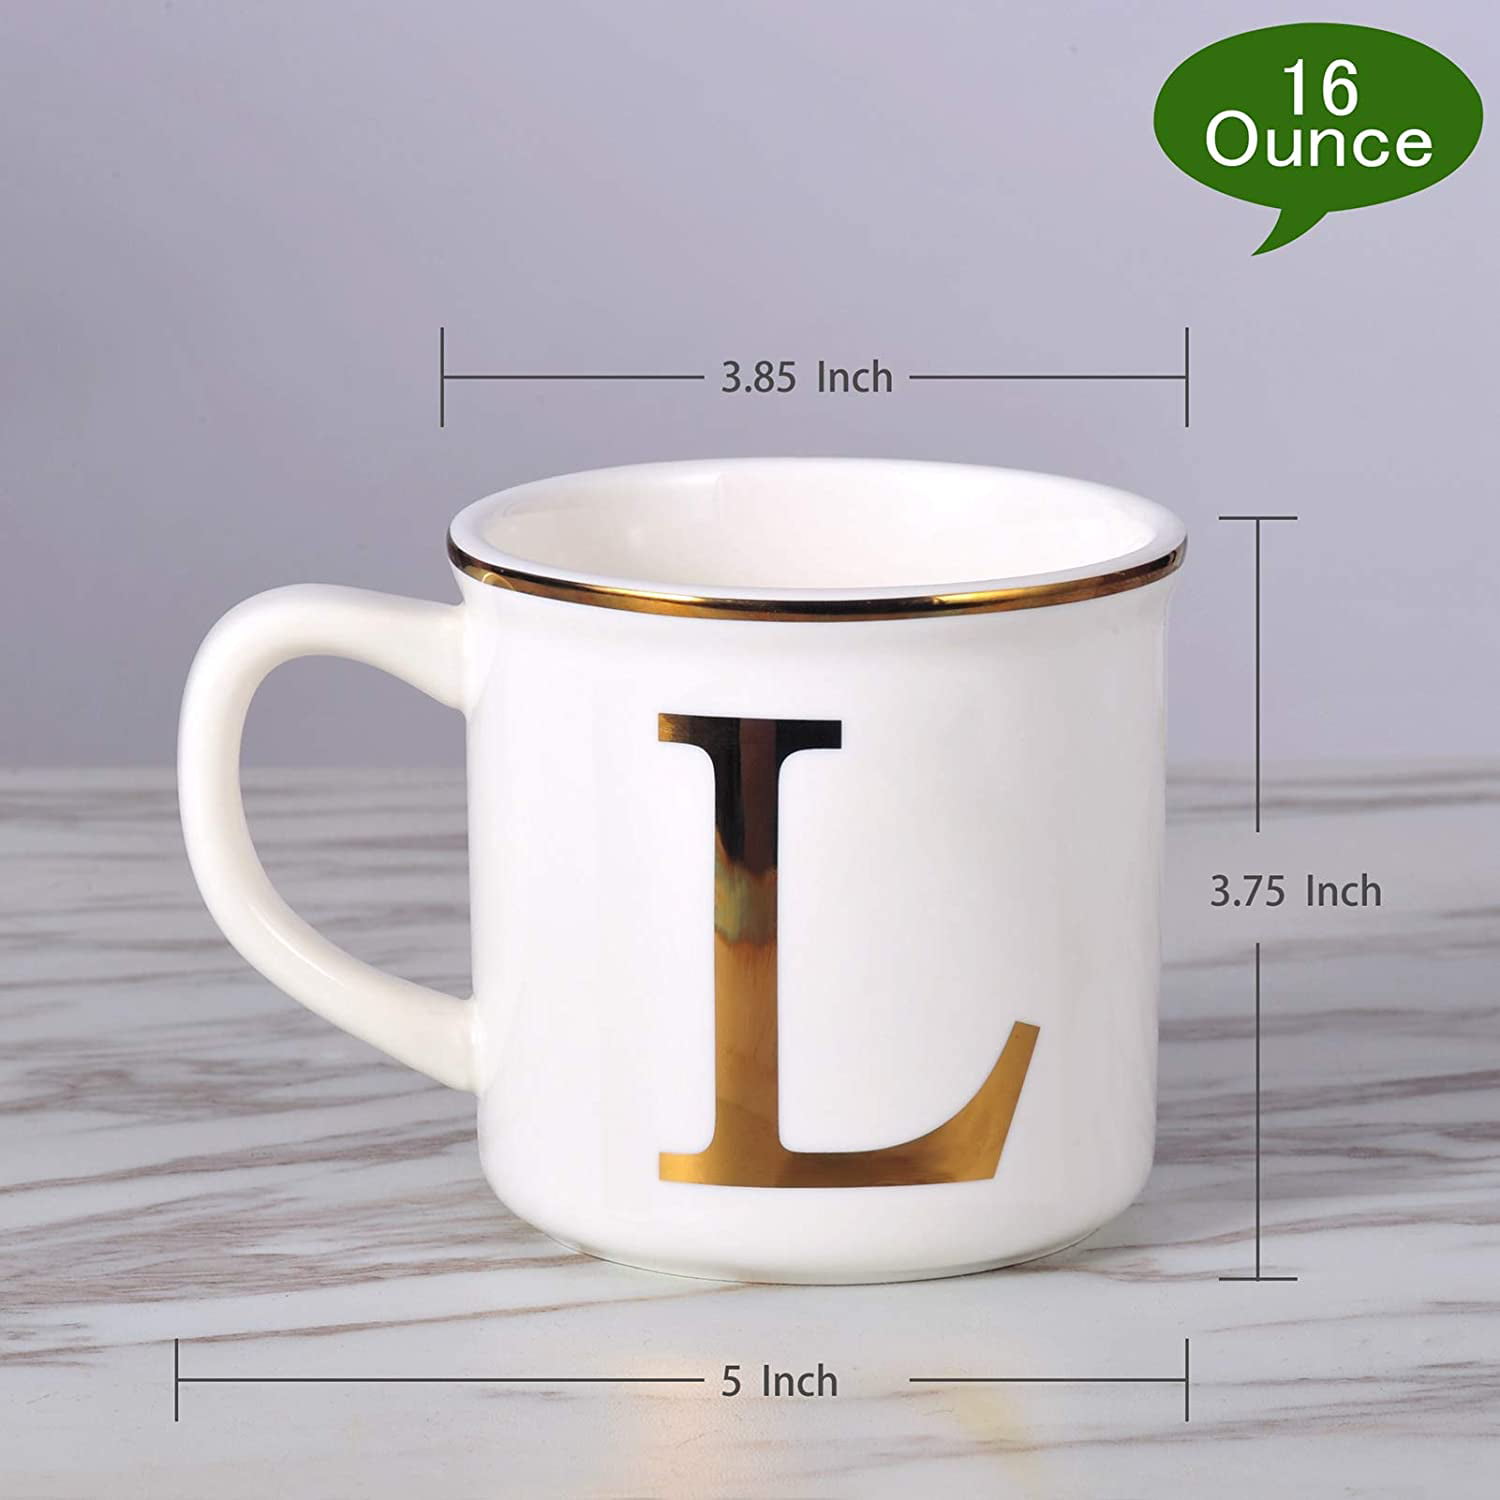 Details about   JENNA Coffee Mug Cup featuring the name in photos of sign letters